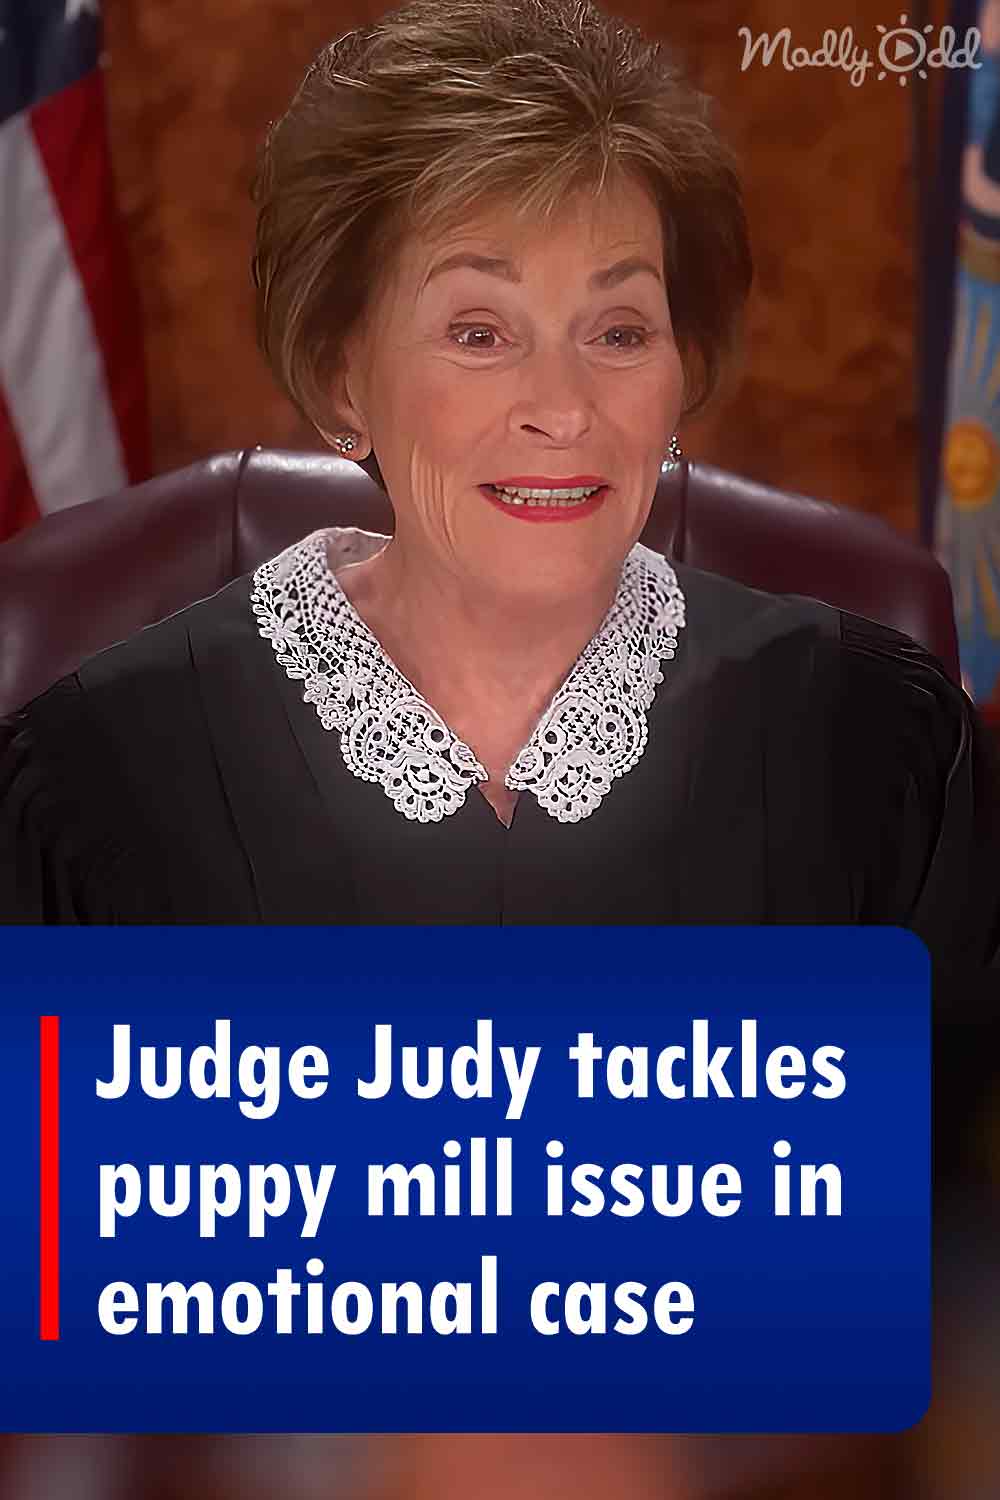 Judge Judy tackles puppy mill issue in emotional case